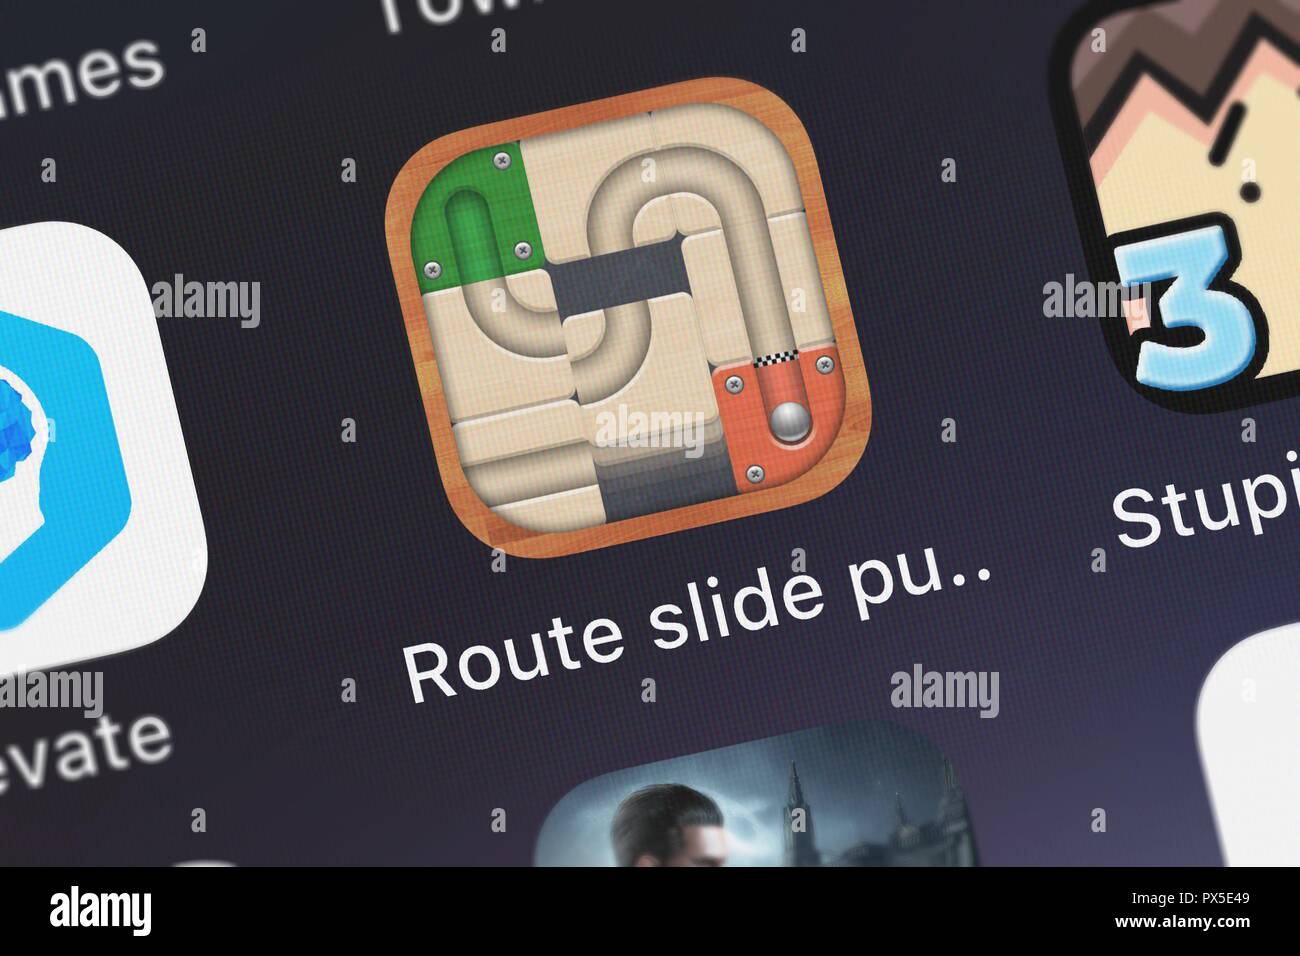 London, United Kingdom - October 19, 2018: Close-up shot of the Route slide puzzle game mobile app from MagicAnt,Inc. Stock Photo